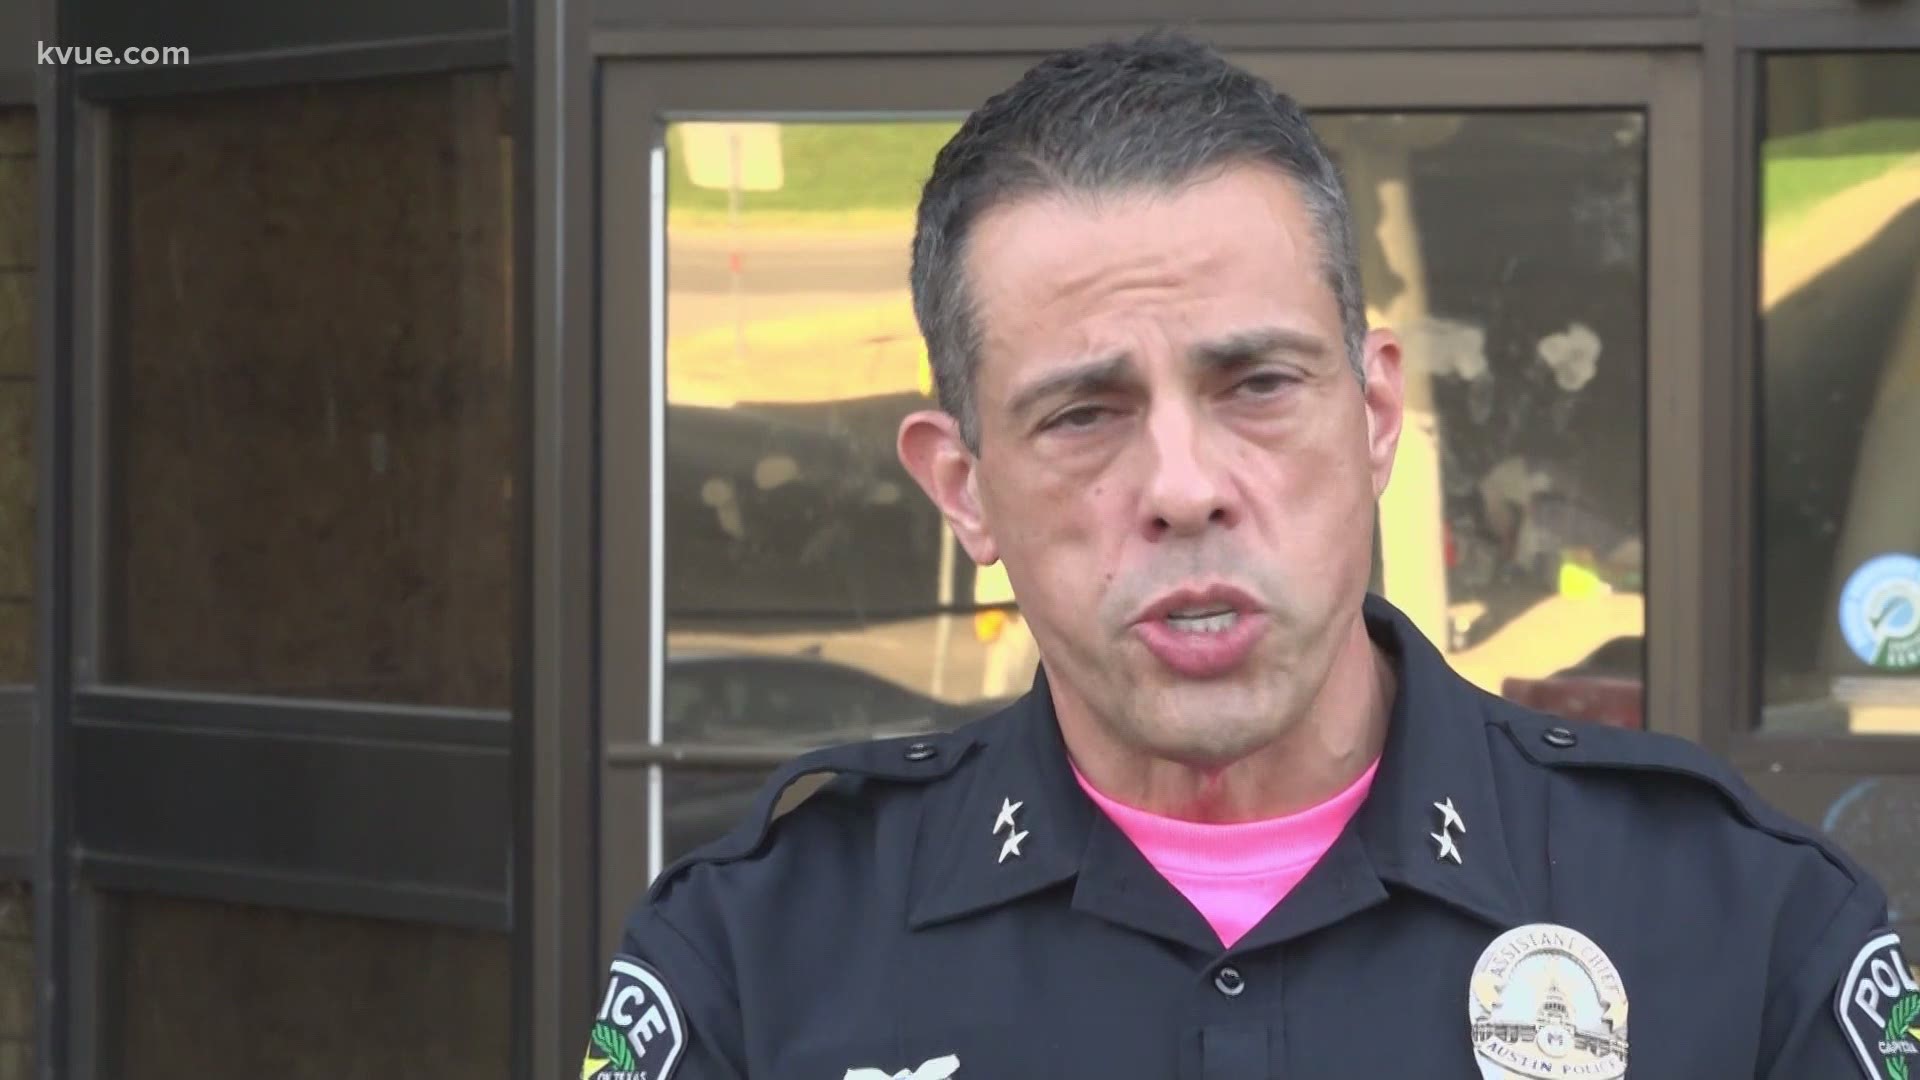 The City of Austin's goal is to appoint a new permanent police chief by the end of the summer. And the public will get to weigh in during the process.